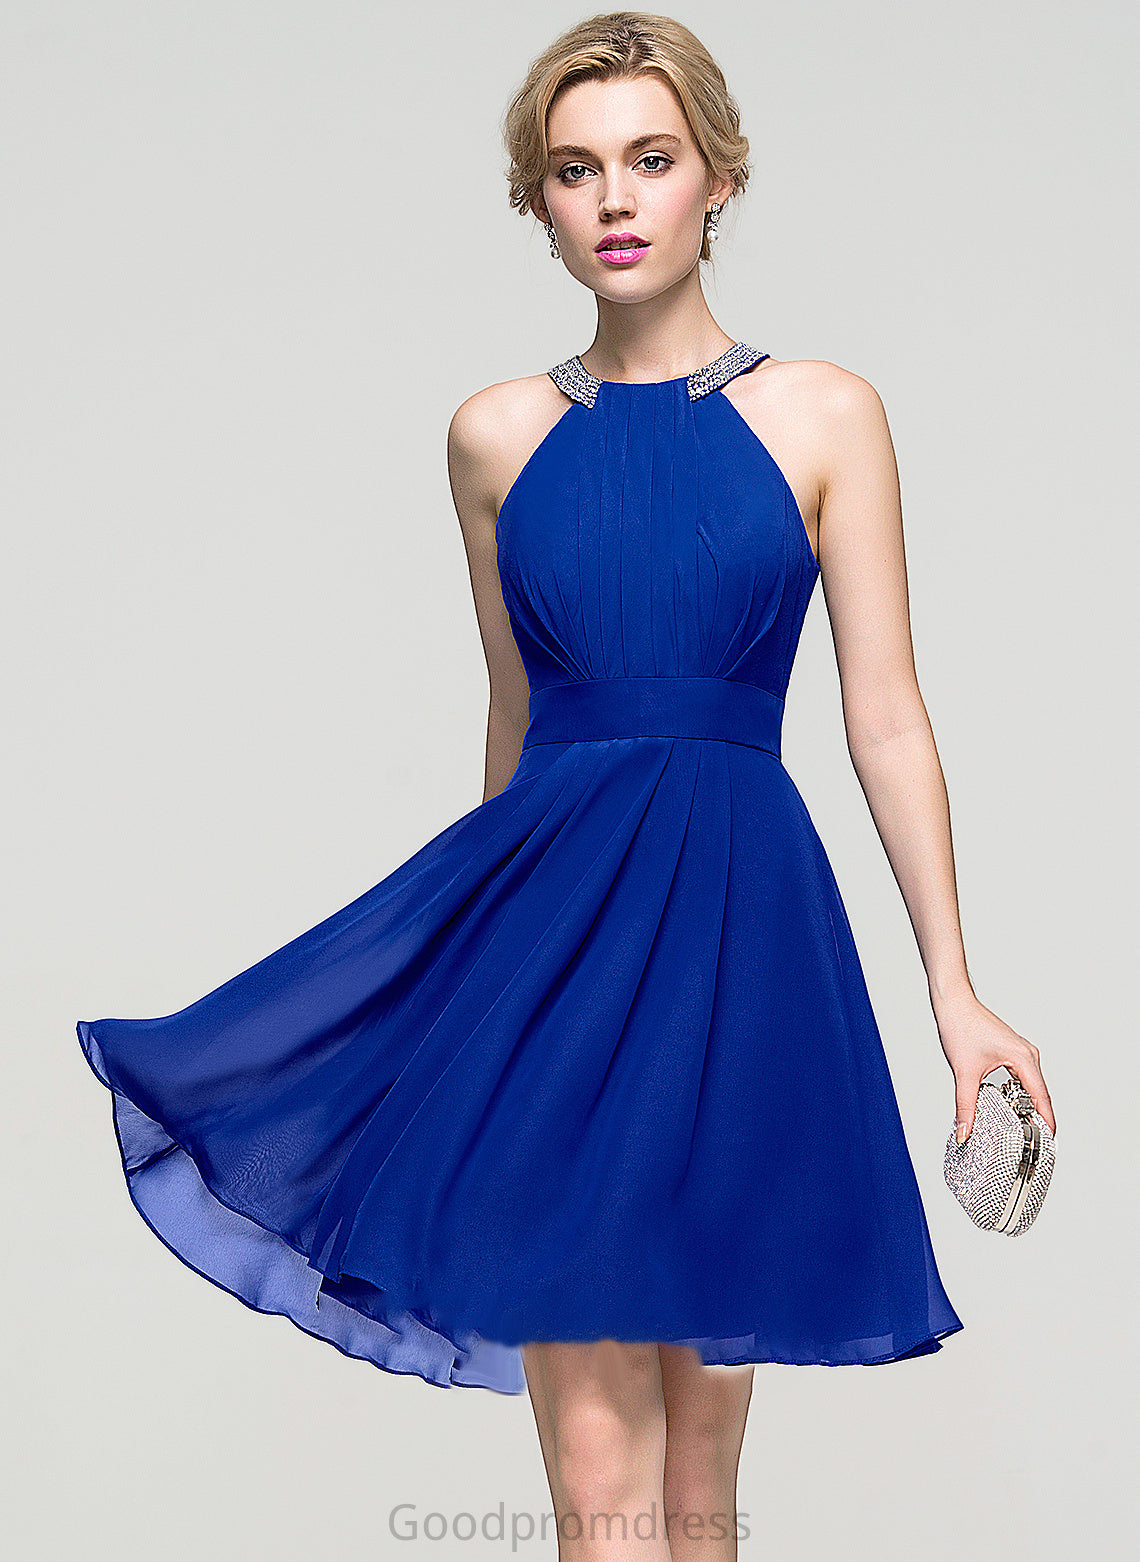 Neck Scoop Beading Knee-Length Chiffon Prom Dresses With Ruffle Ayana A-Line